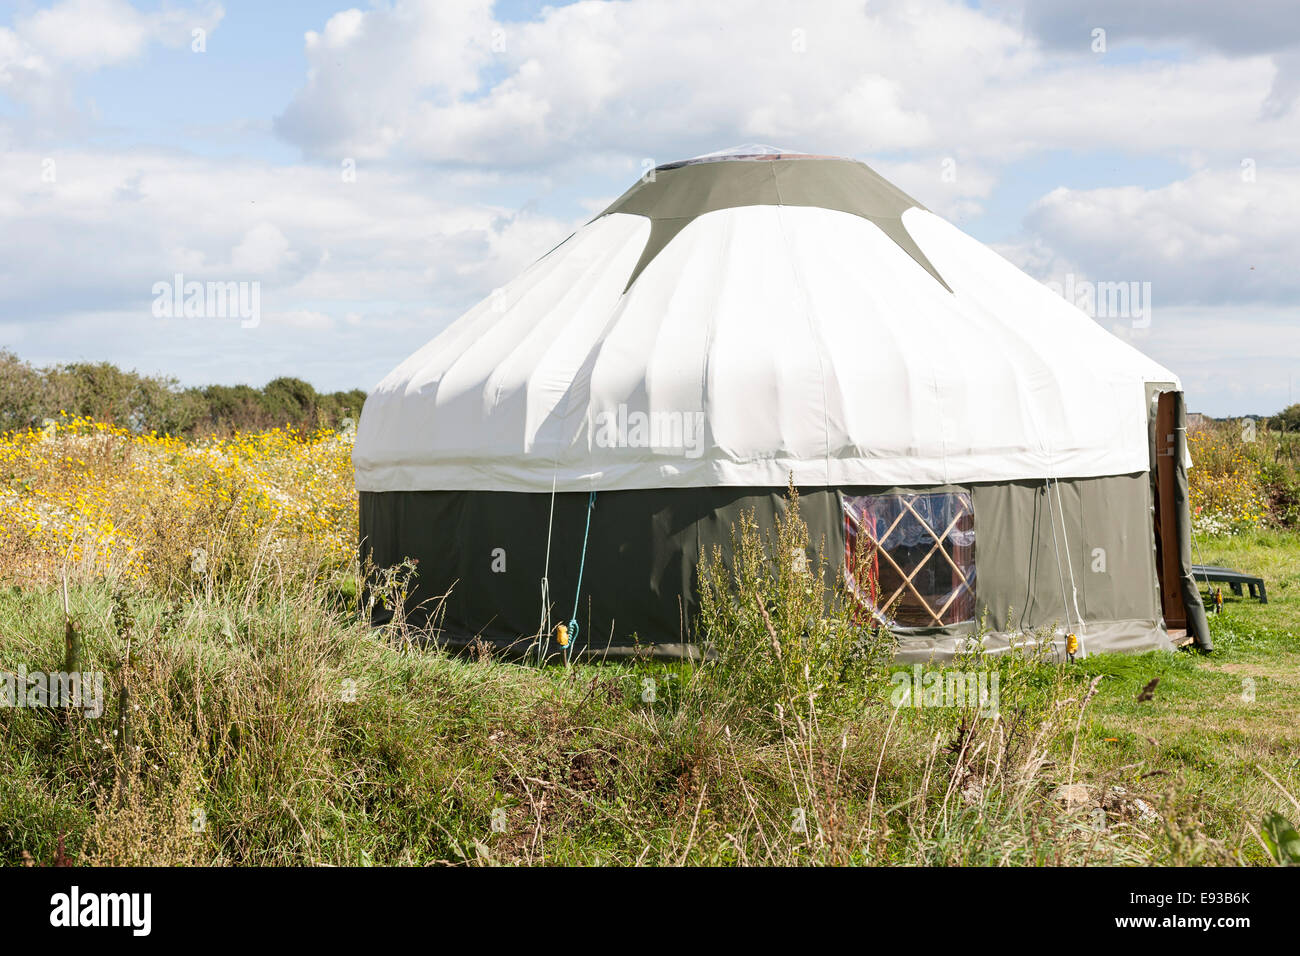 Yurt for camping at Higher Nature, East Prawle, Devon Stock Photo